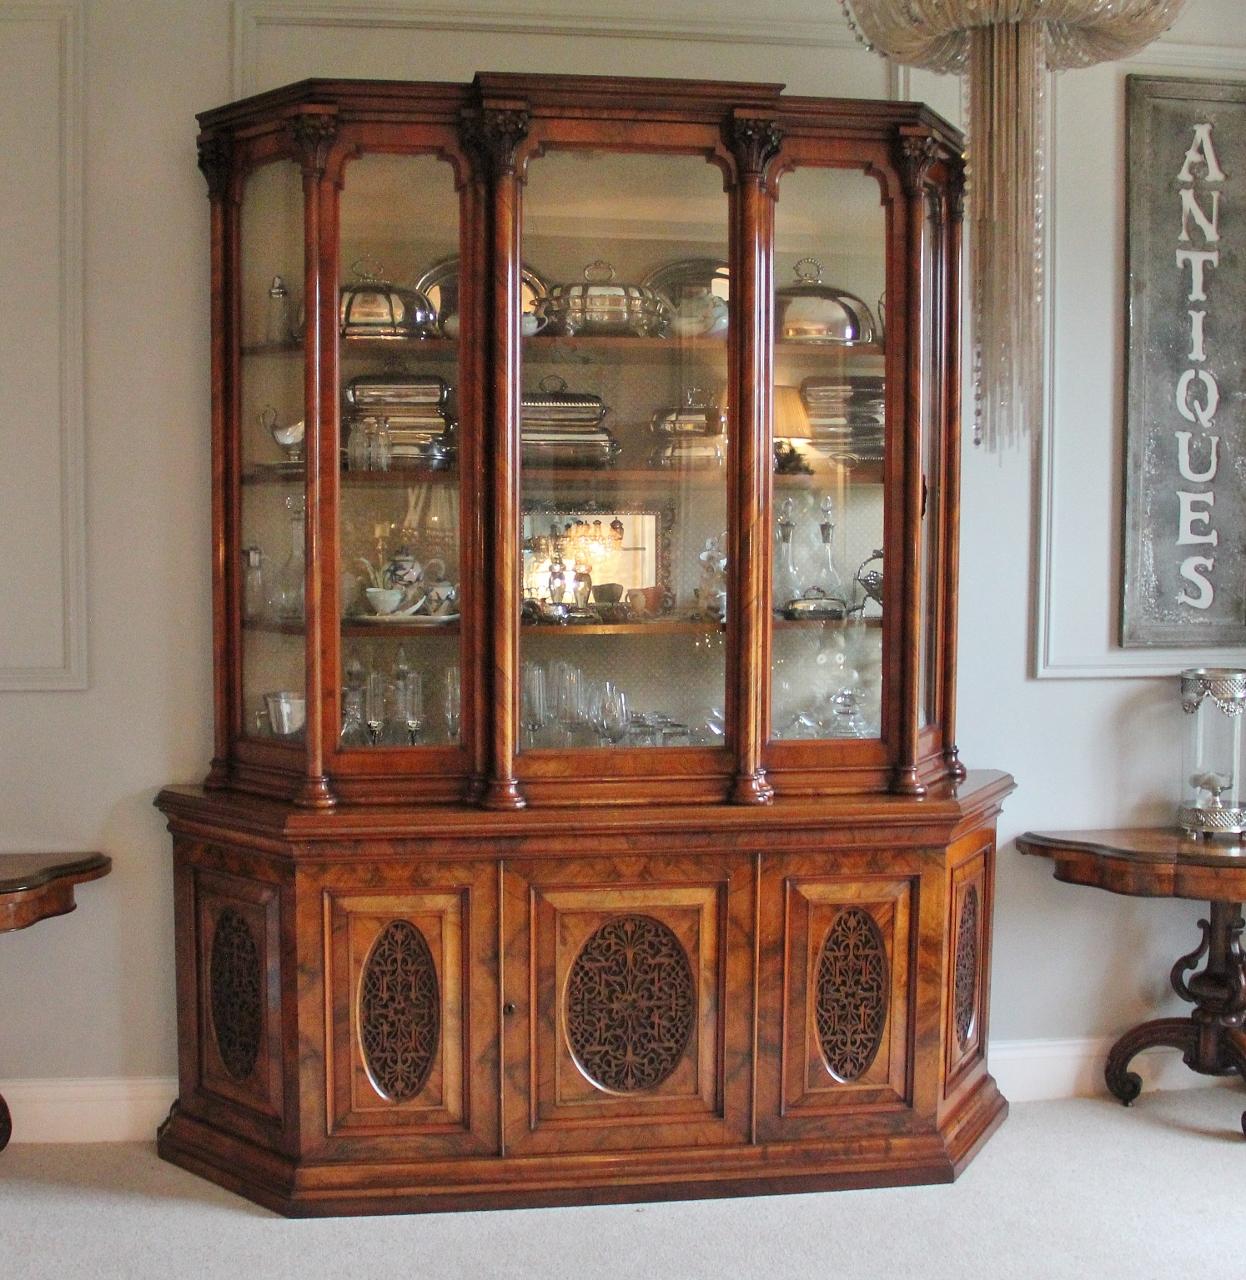 Magnificent exhibition quality antique 19th century Victorian burr walnut carved breakfront display cabinet having a wonderful breakfront glazed top with beautifully finished finely carved walnut columns ending in delightfully shaped cornices. It